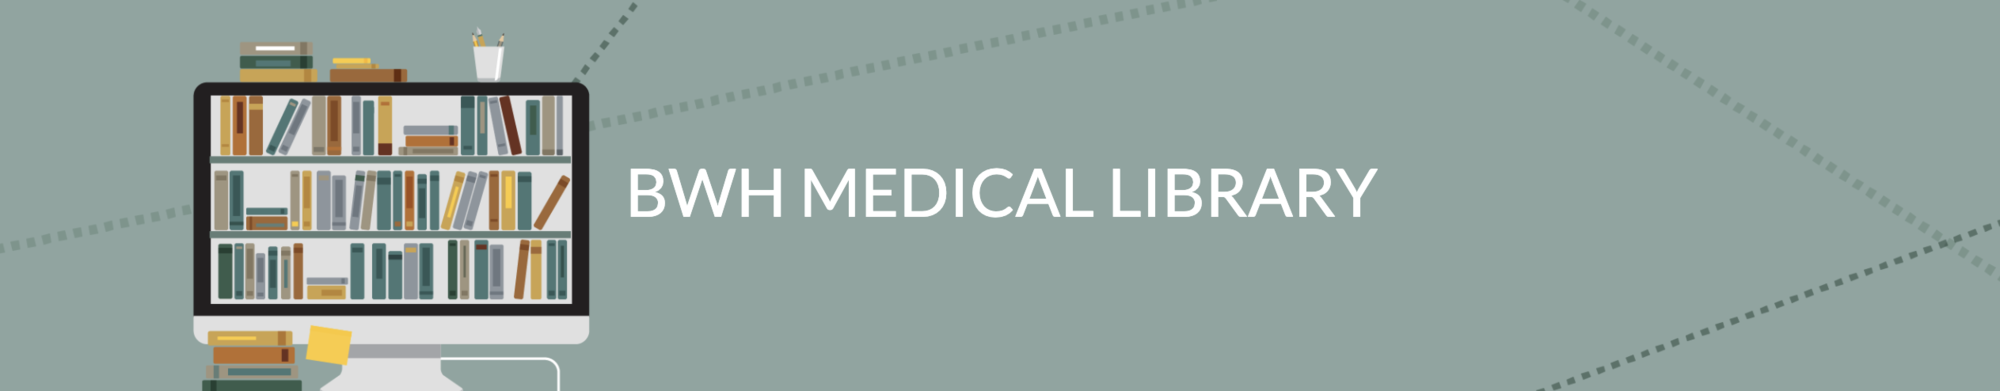 BWH Medical Library Banner